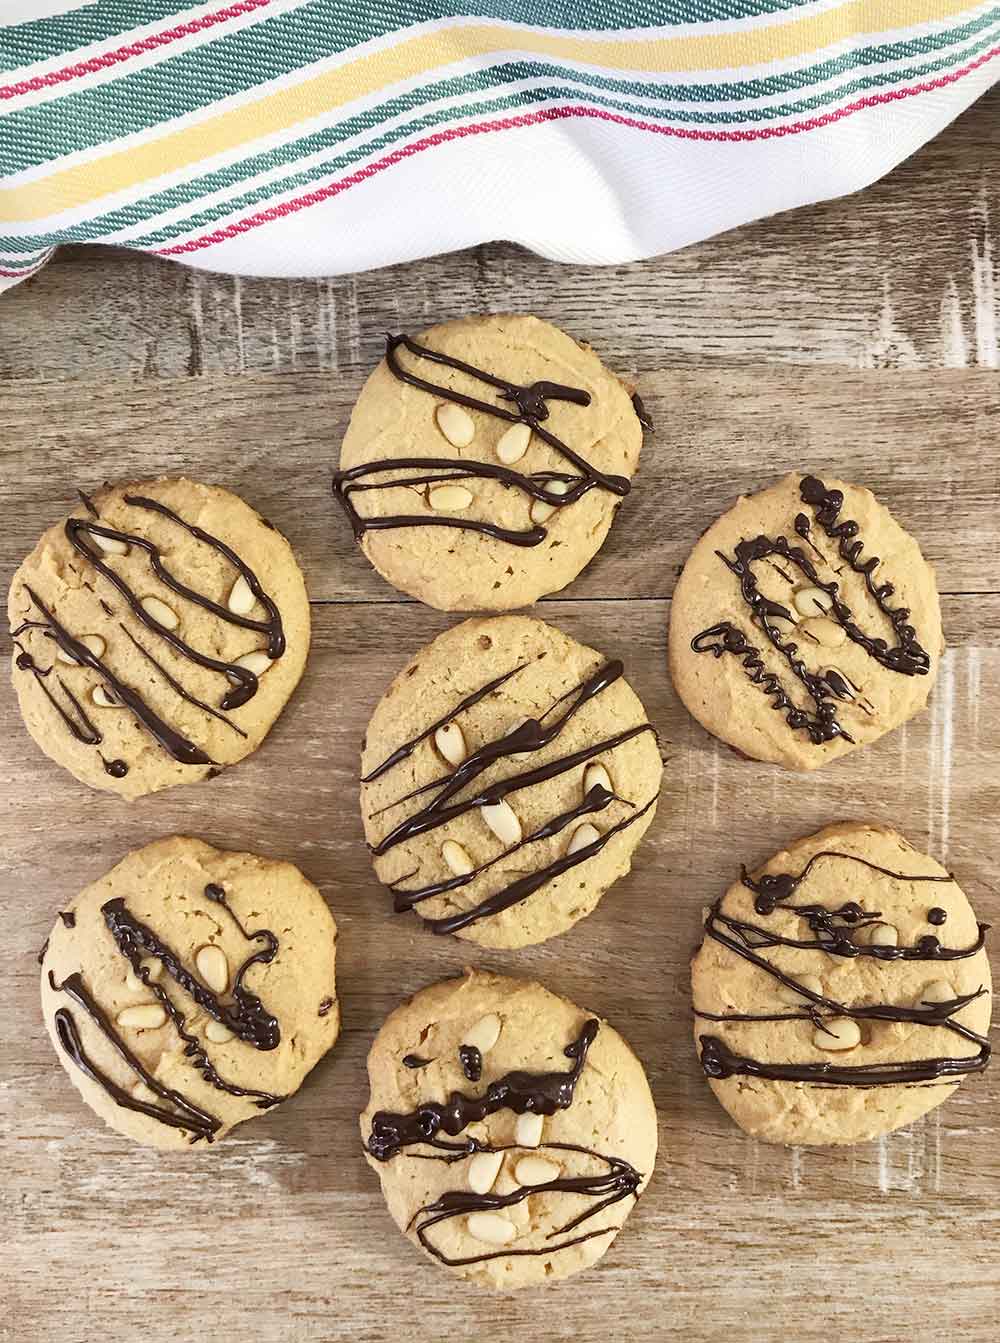 Keto coconut flour peanut butter cookies on the table.